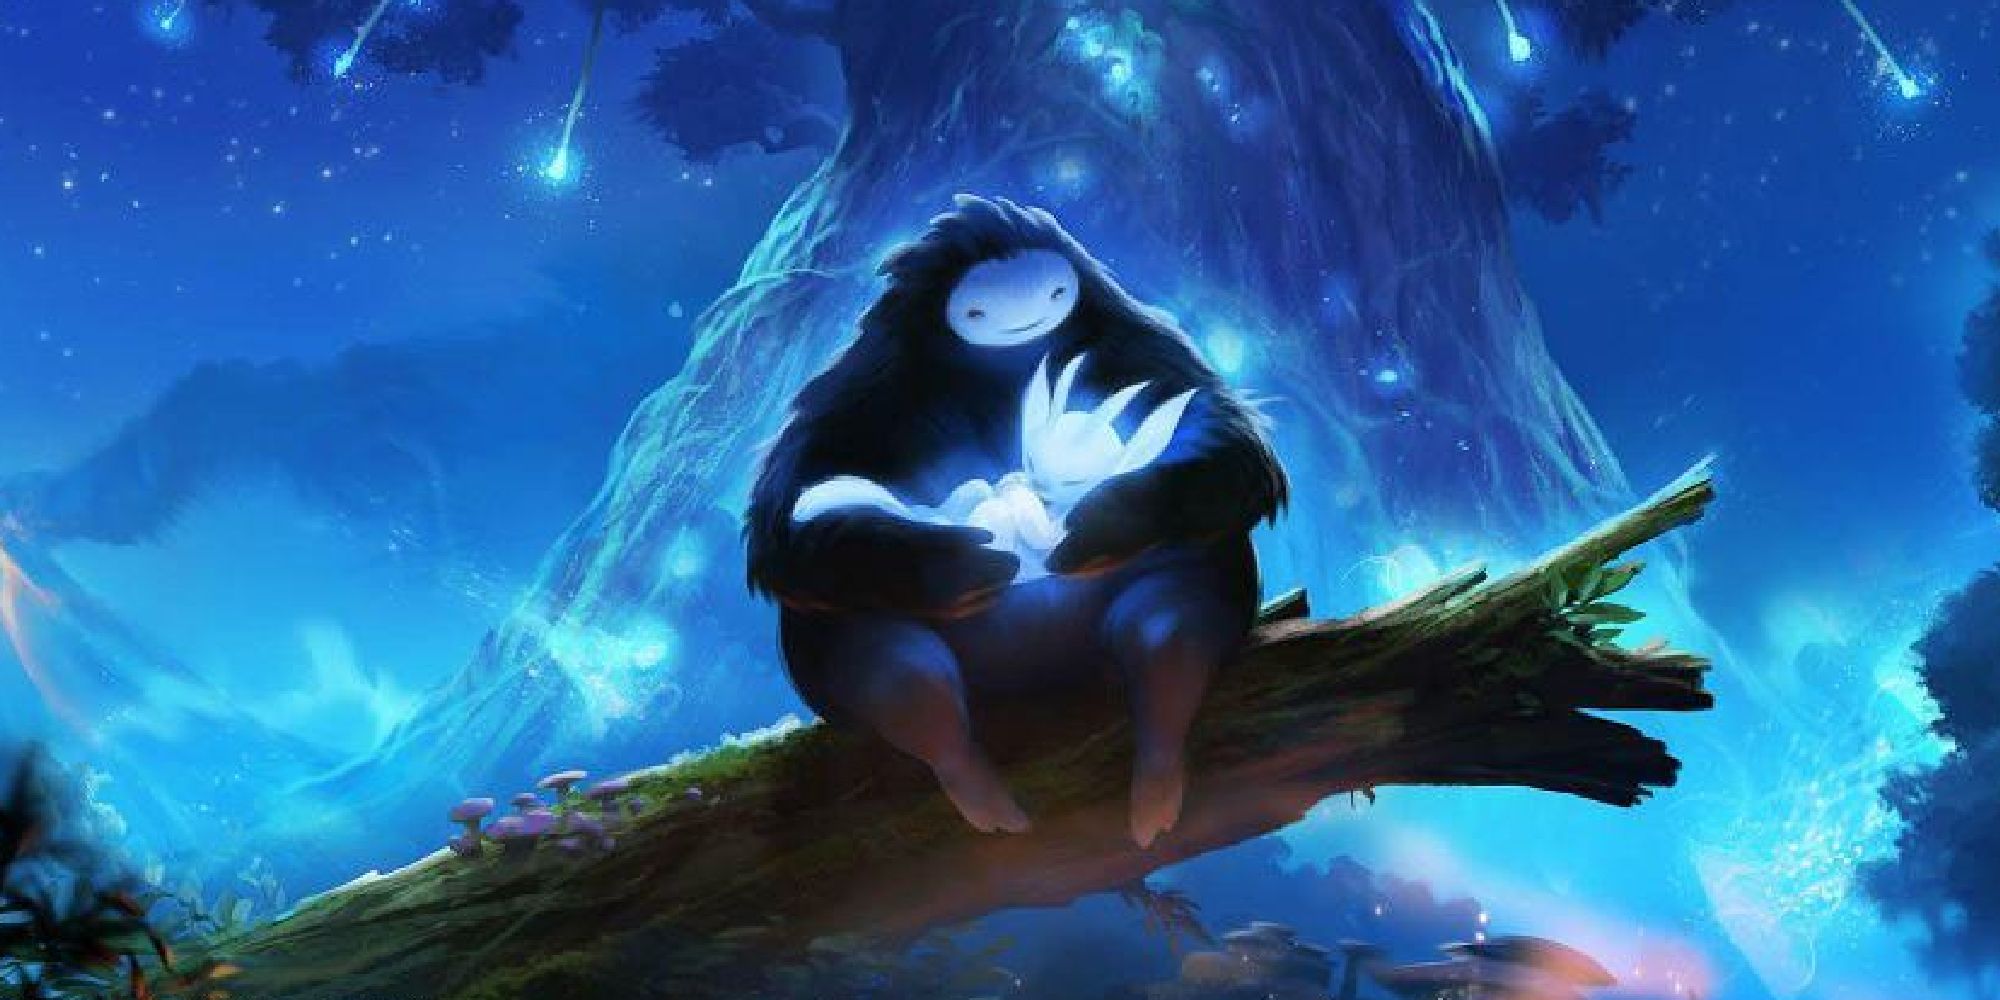 Ori being cradled by Naru in official artwork from Ori and the Blind Forest